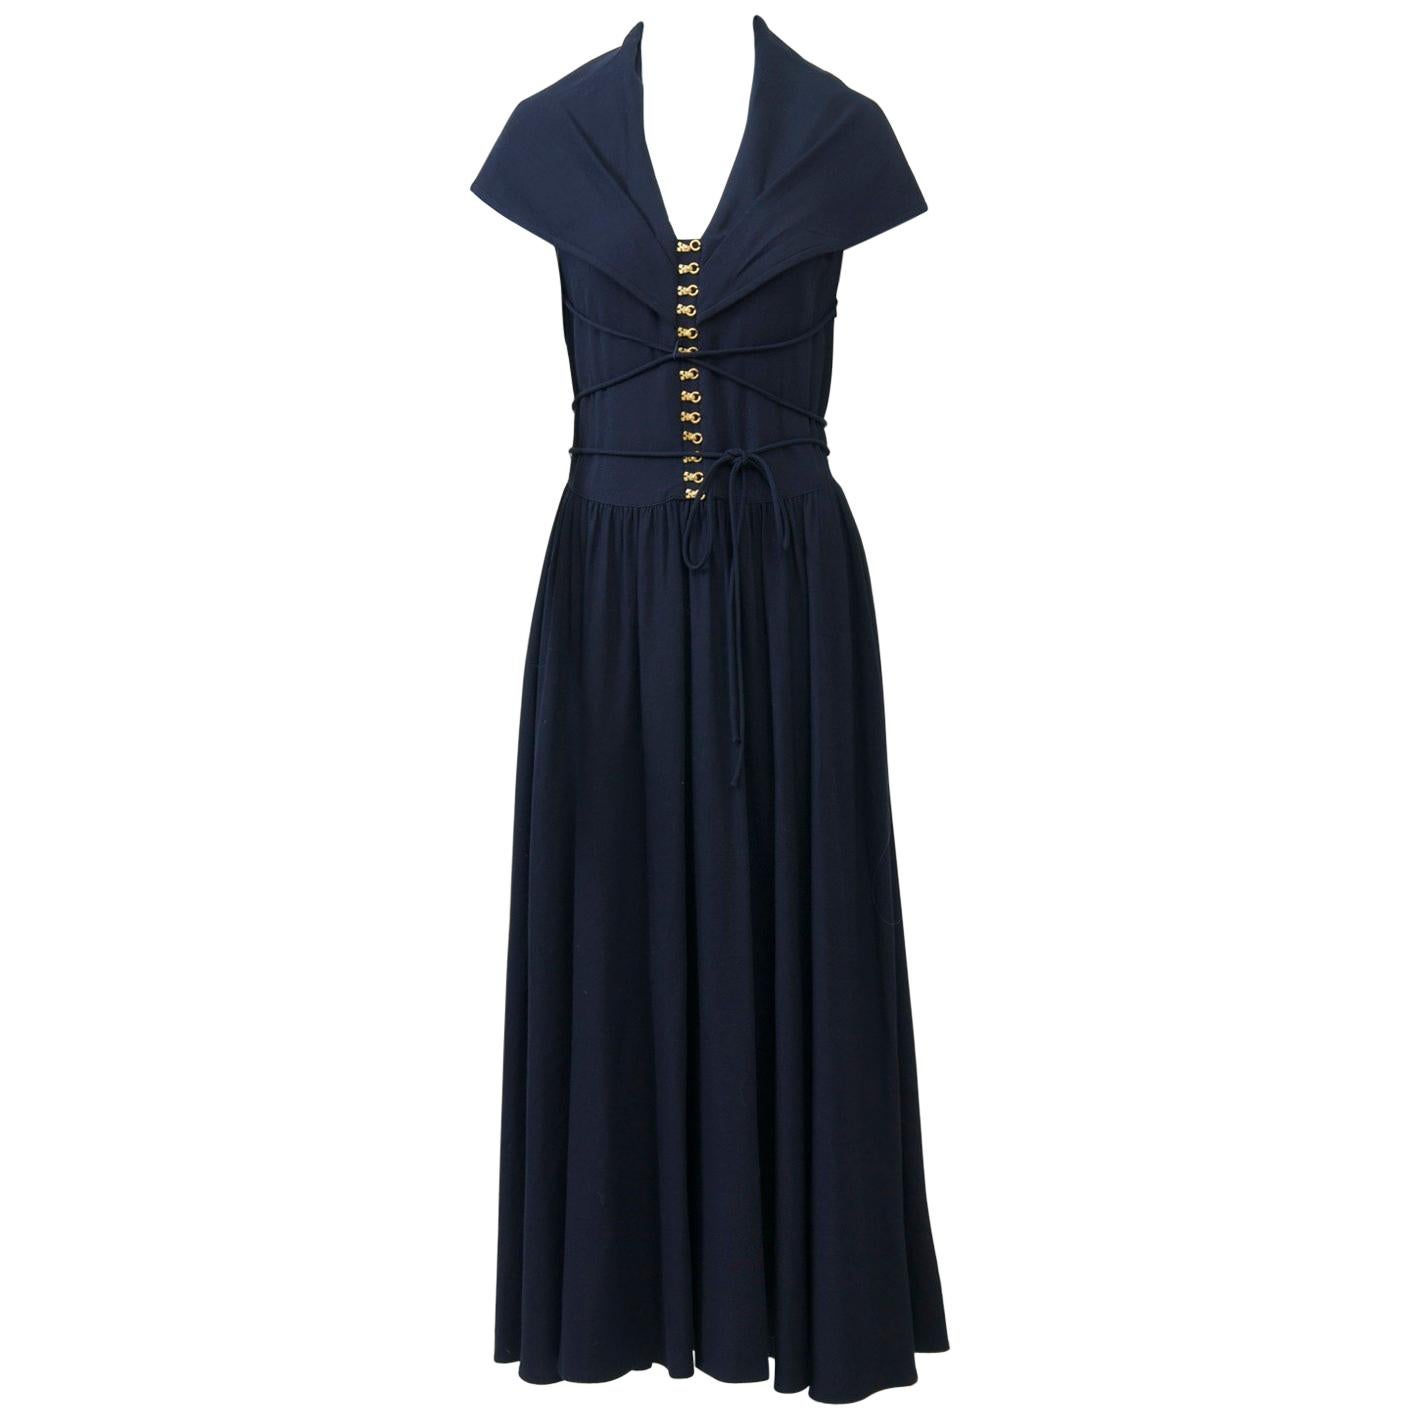 Kathryn Dianos Navy Maxi Dress For Sale ...